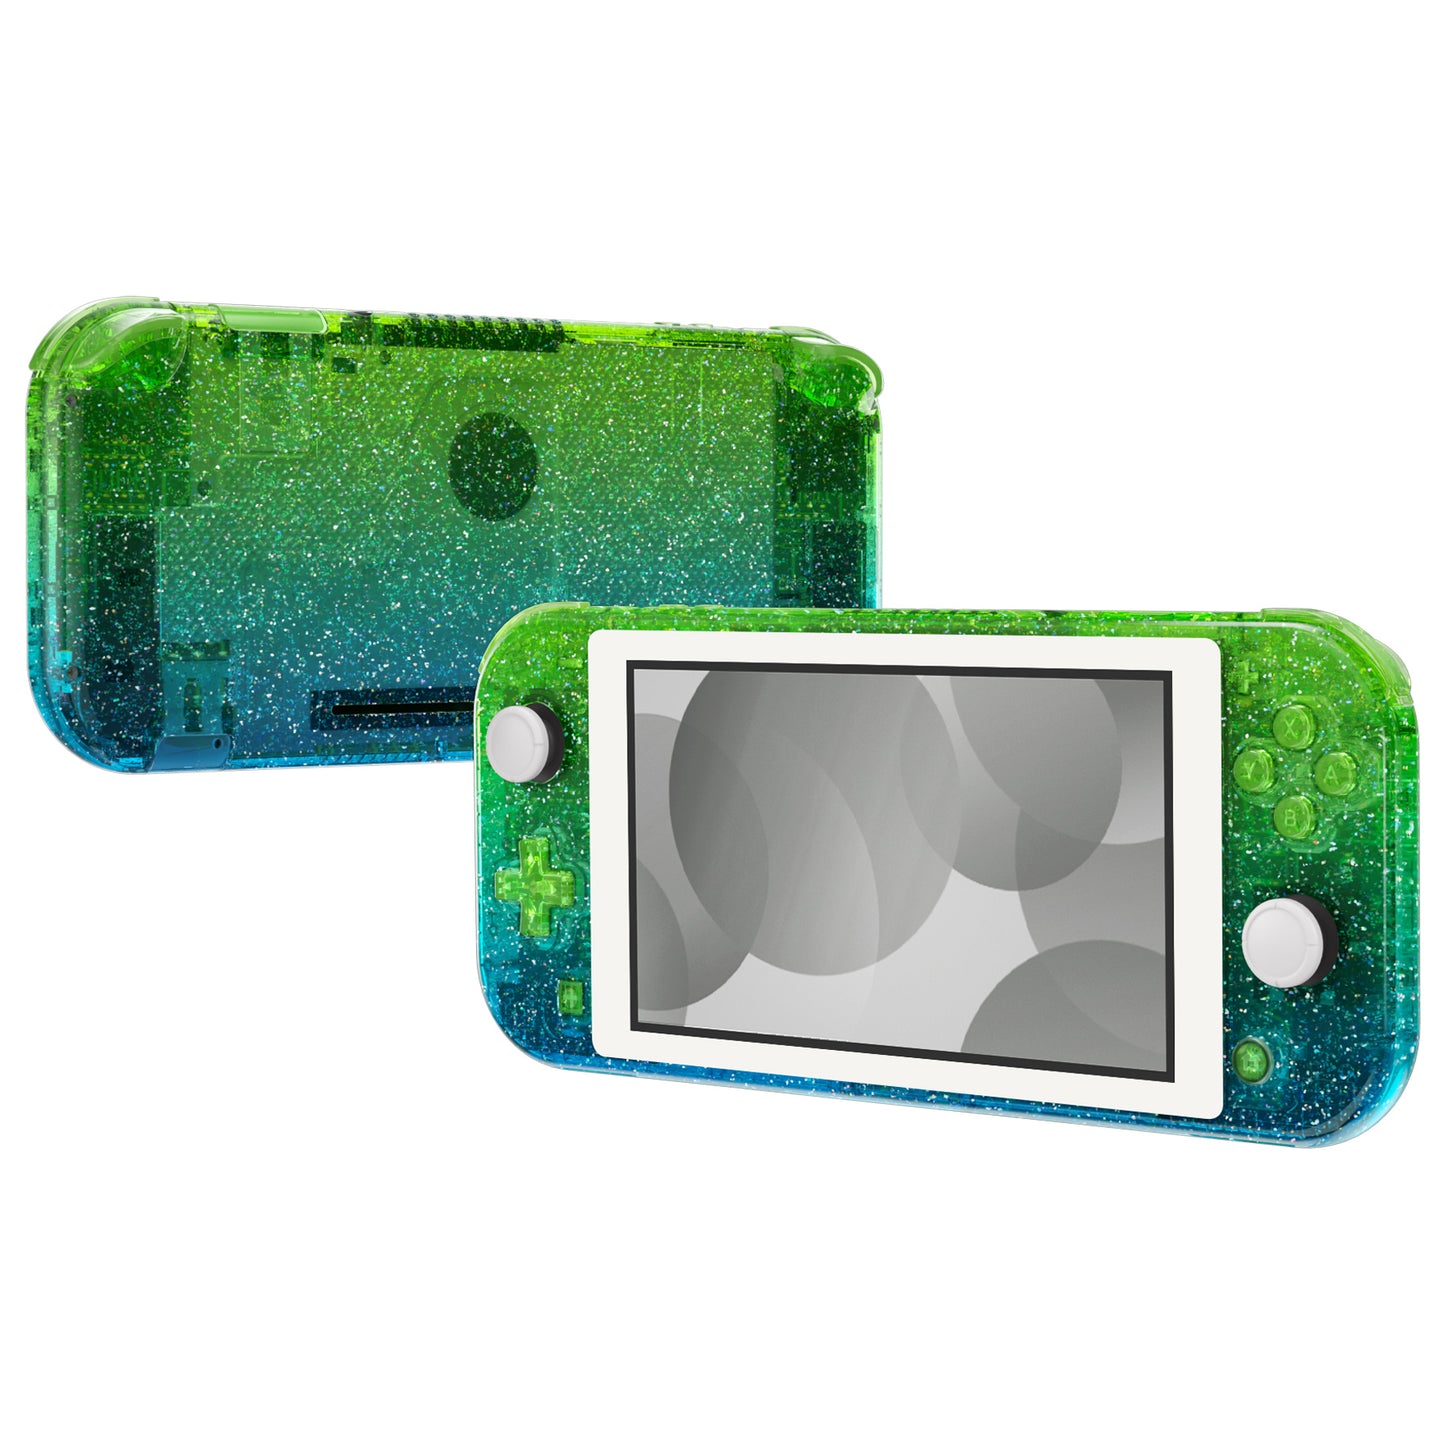 eXtremeRate Replacement Housing Shell for with Screen Protector for Nintendo Switch Lite - Glitter Gradient Translucent Green Blue eXtremeRate